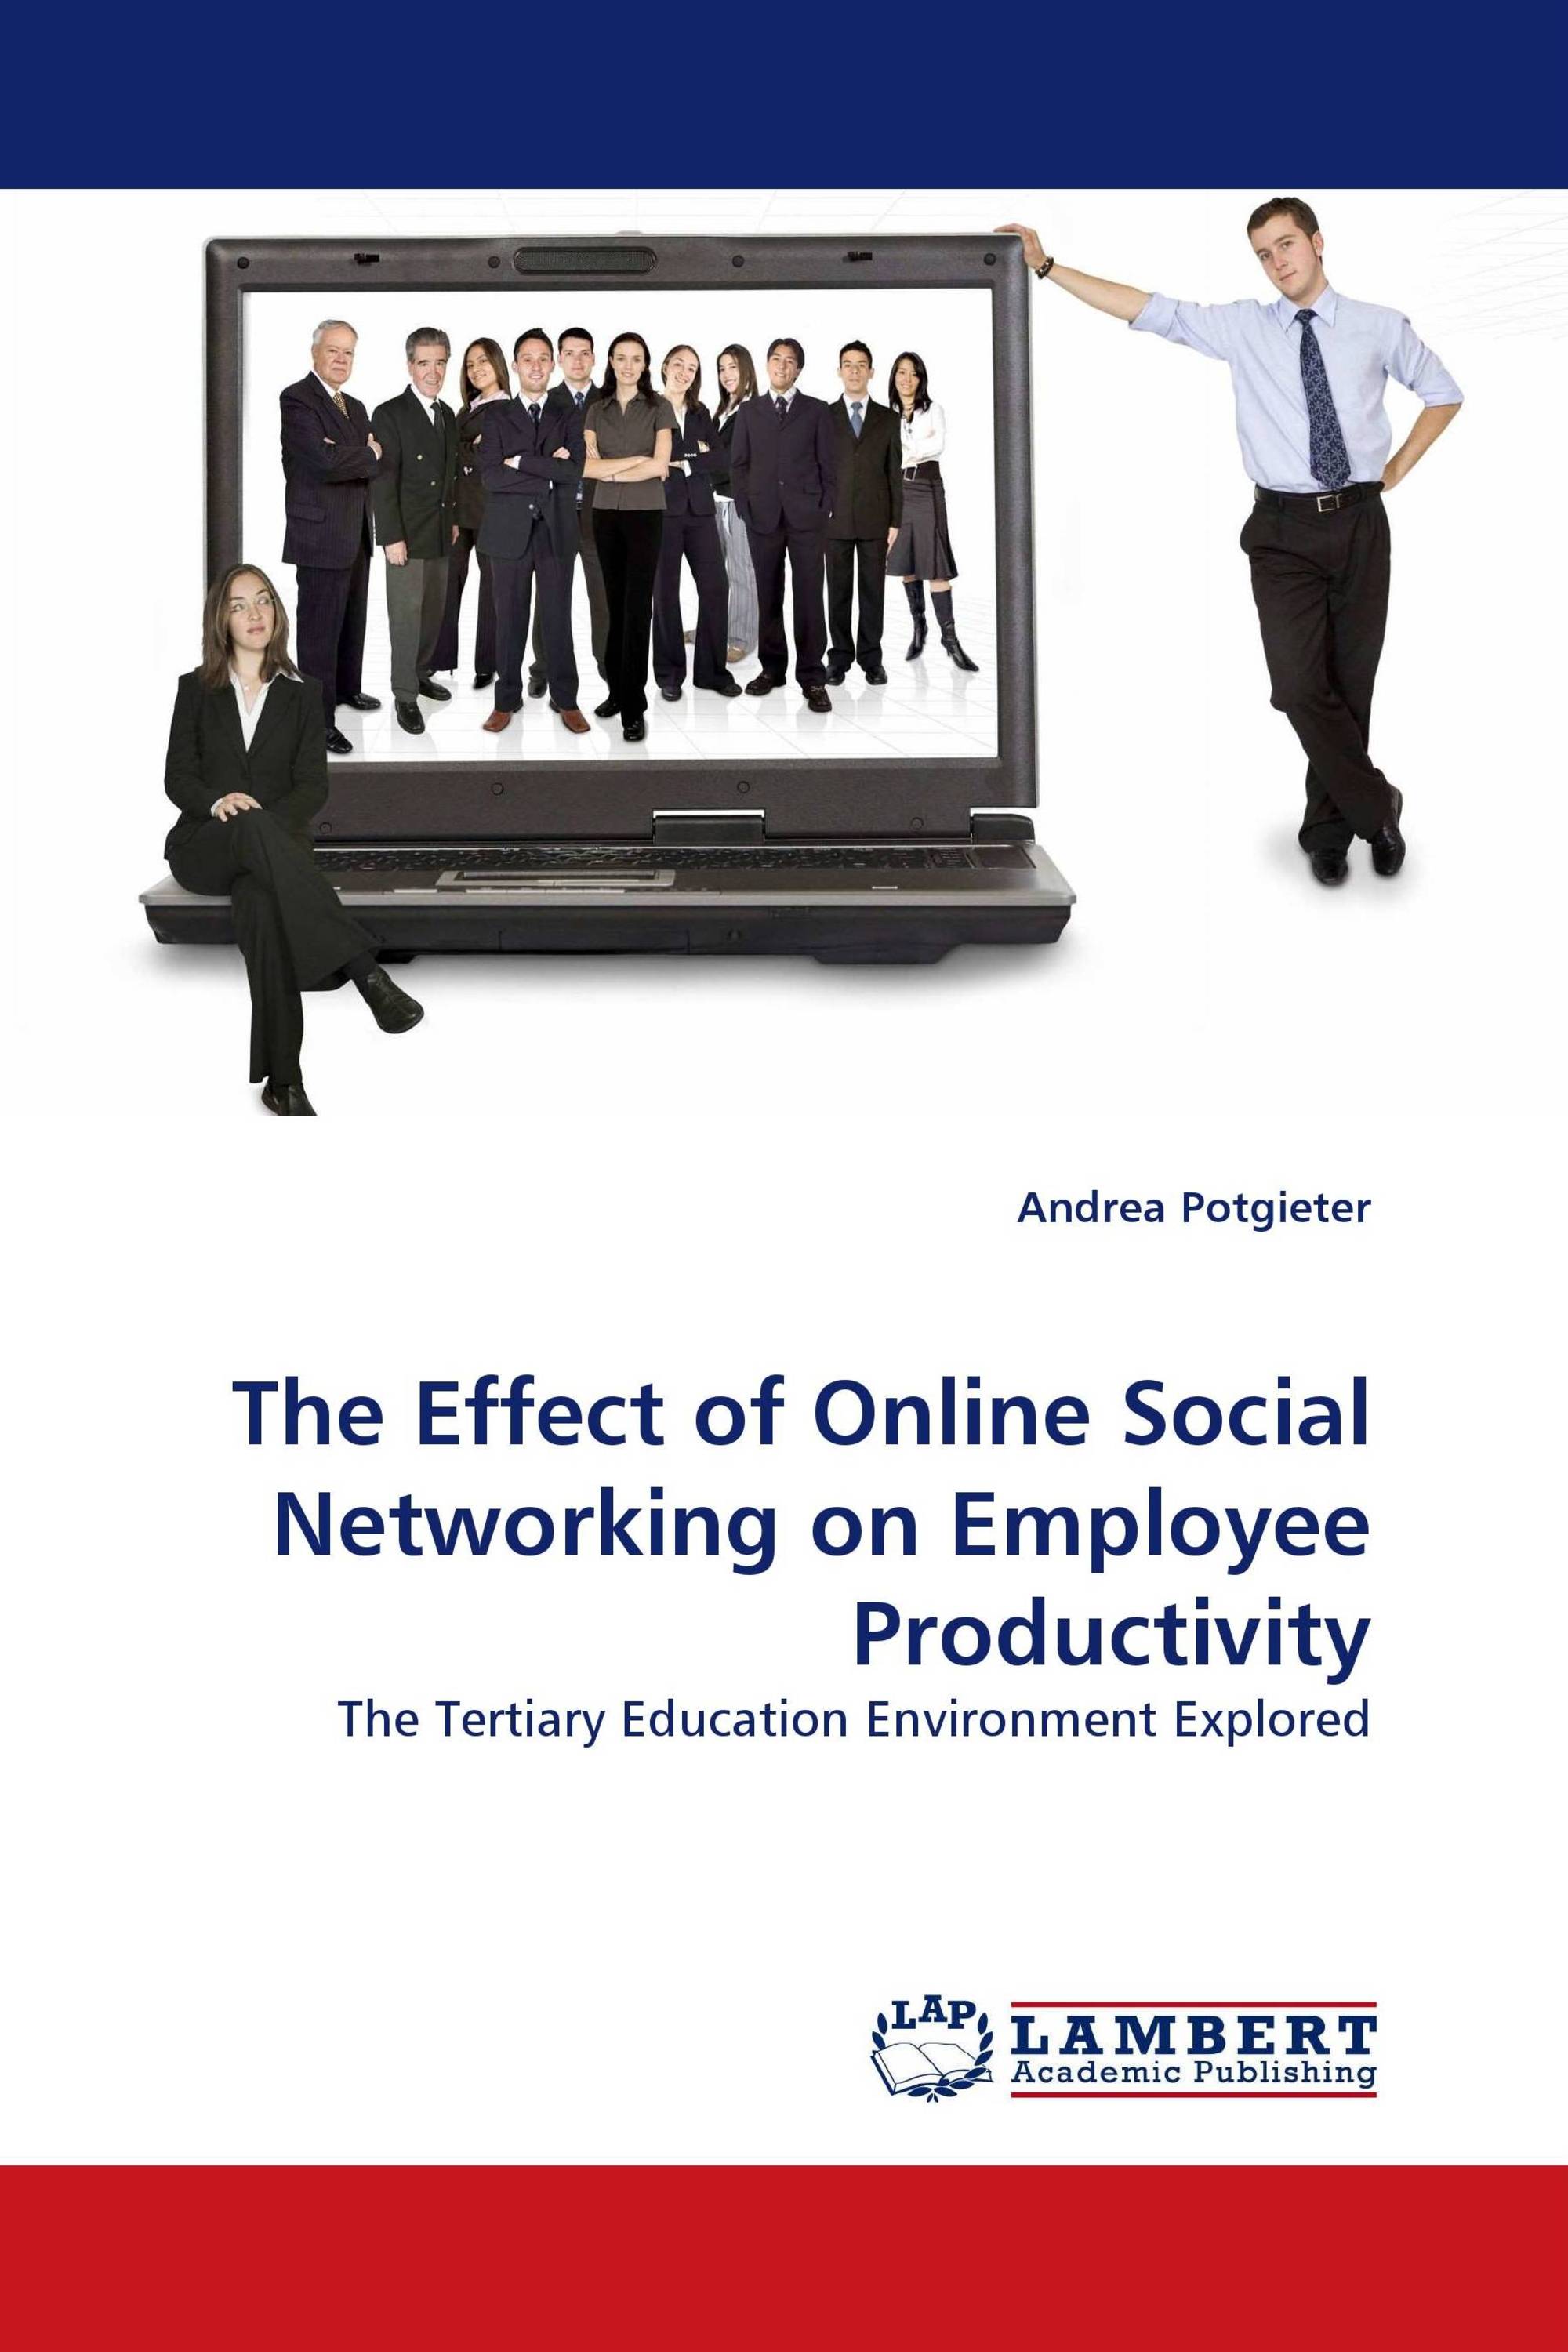 Are social networks good for job productivity